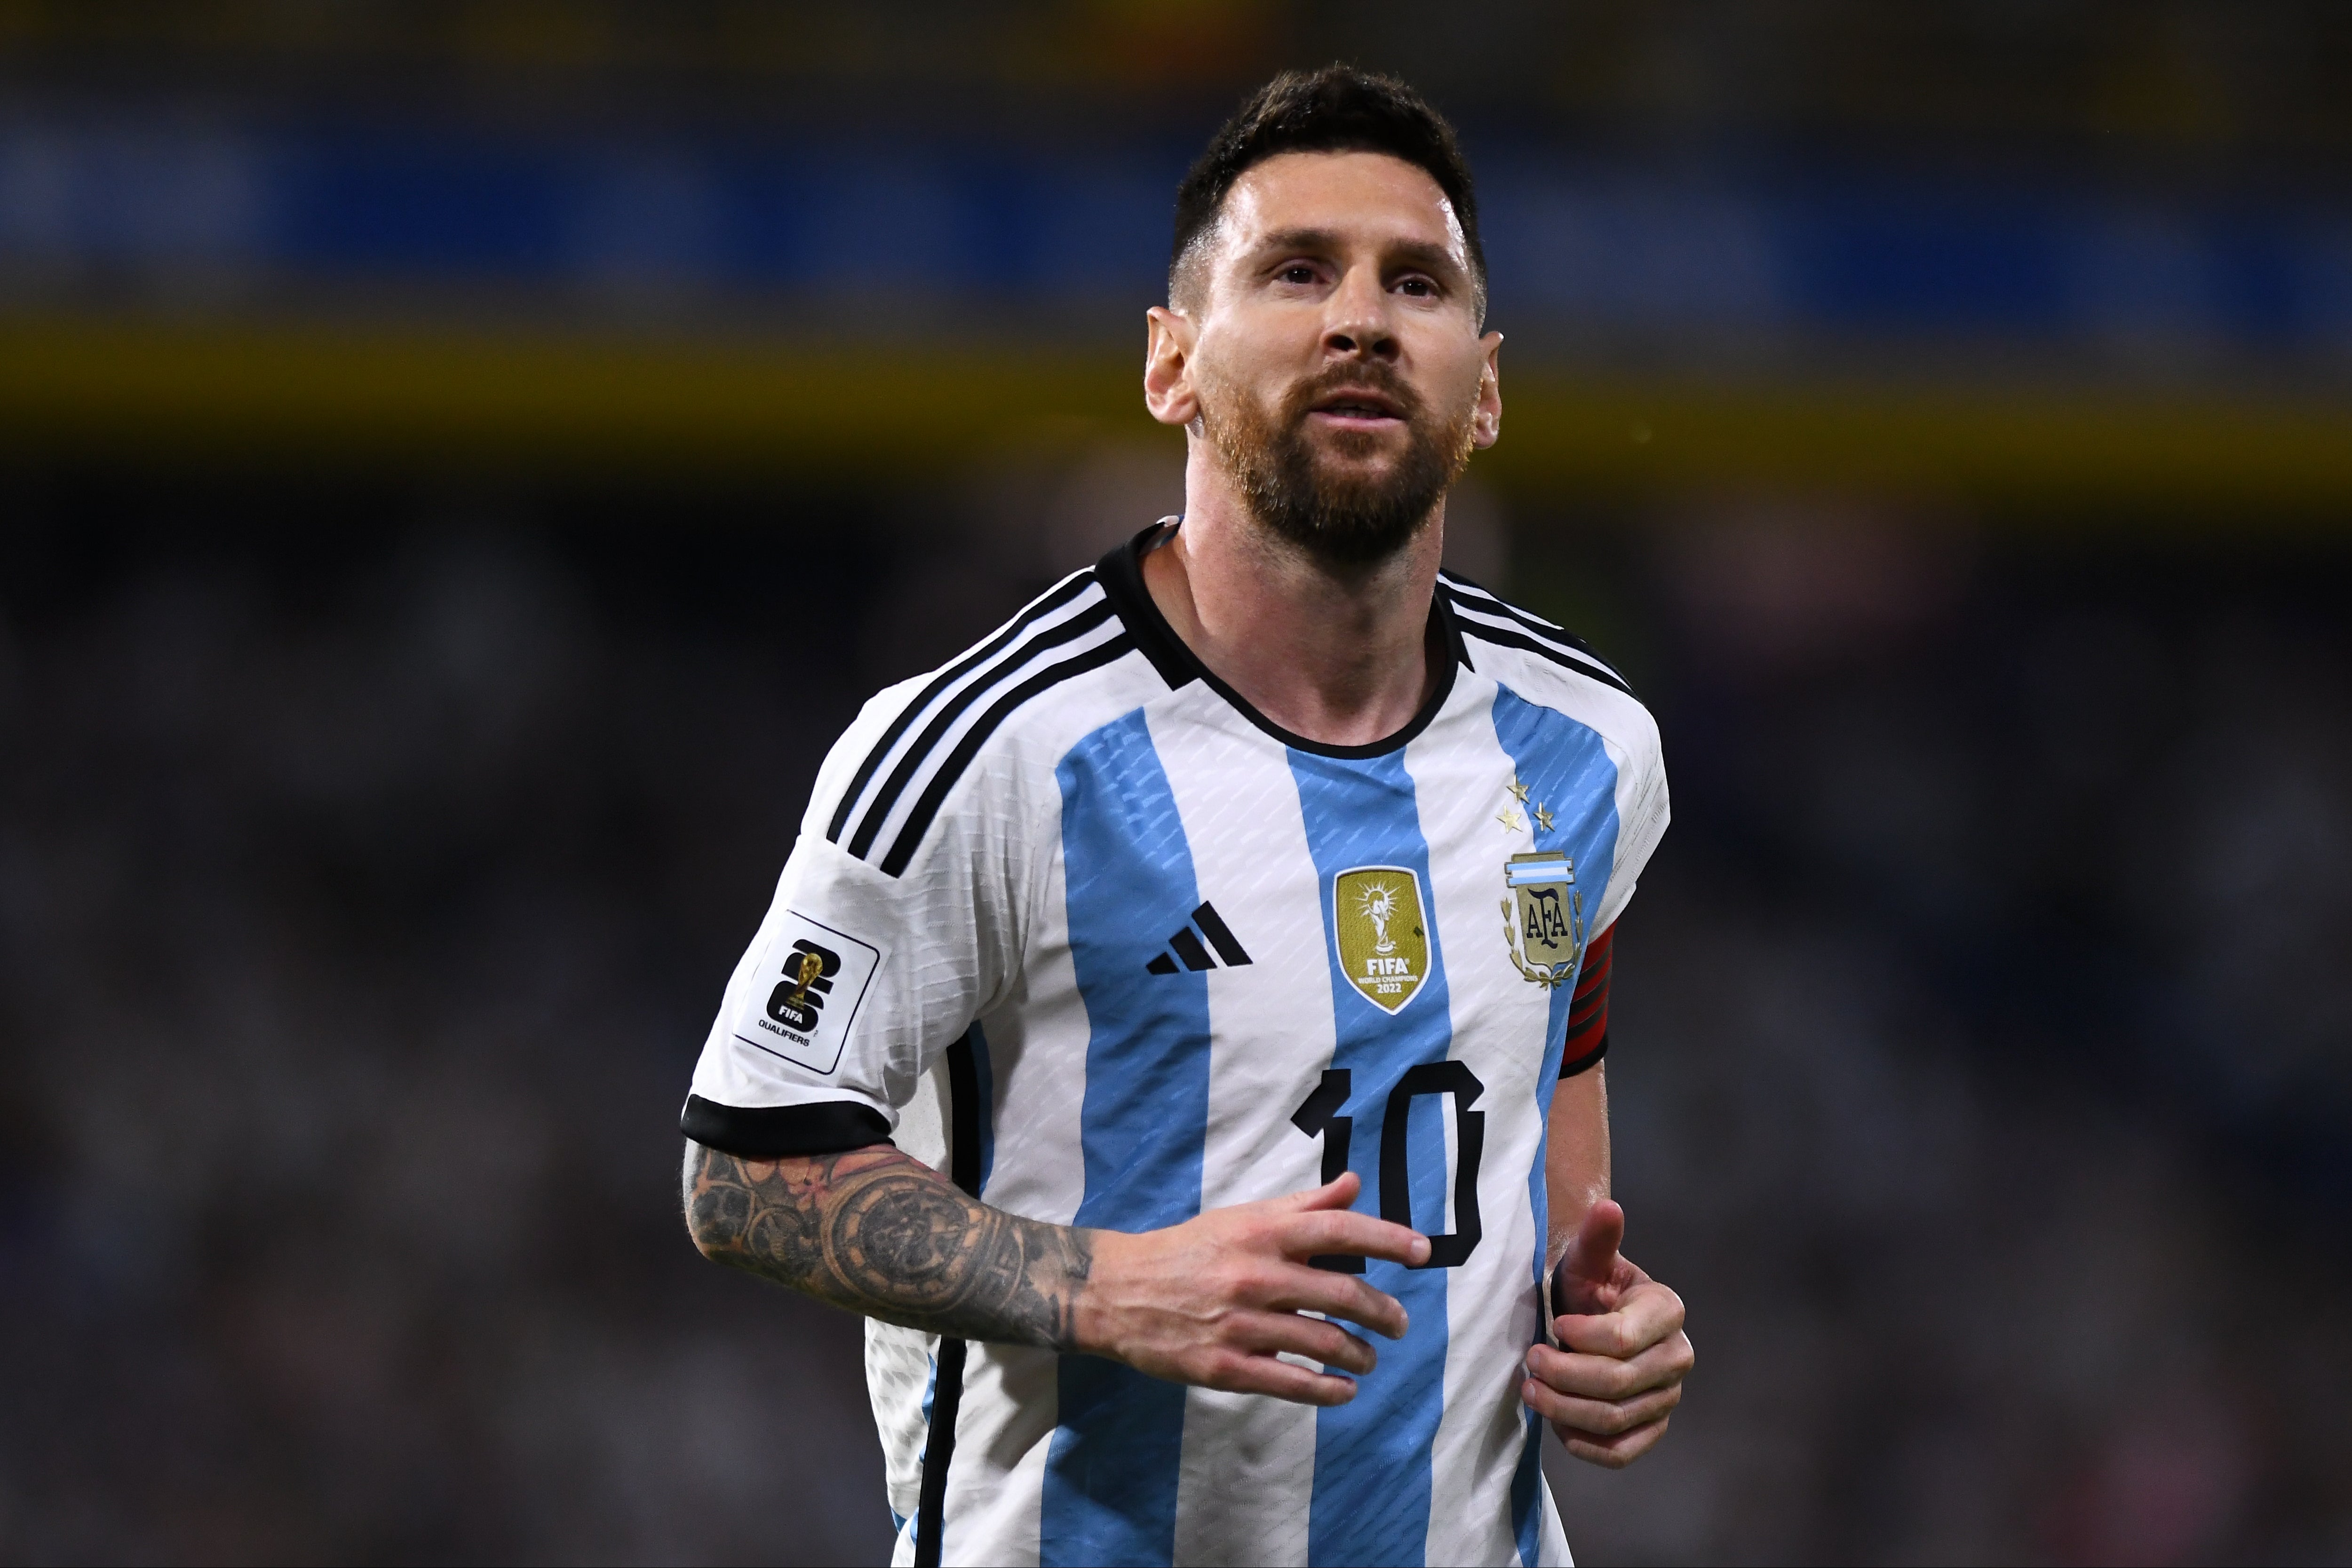 Lionel Messi won’t be playing in China after Argentina’s friendlies were rearranged